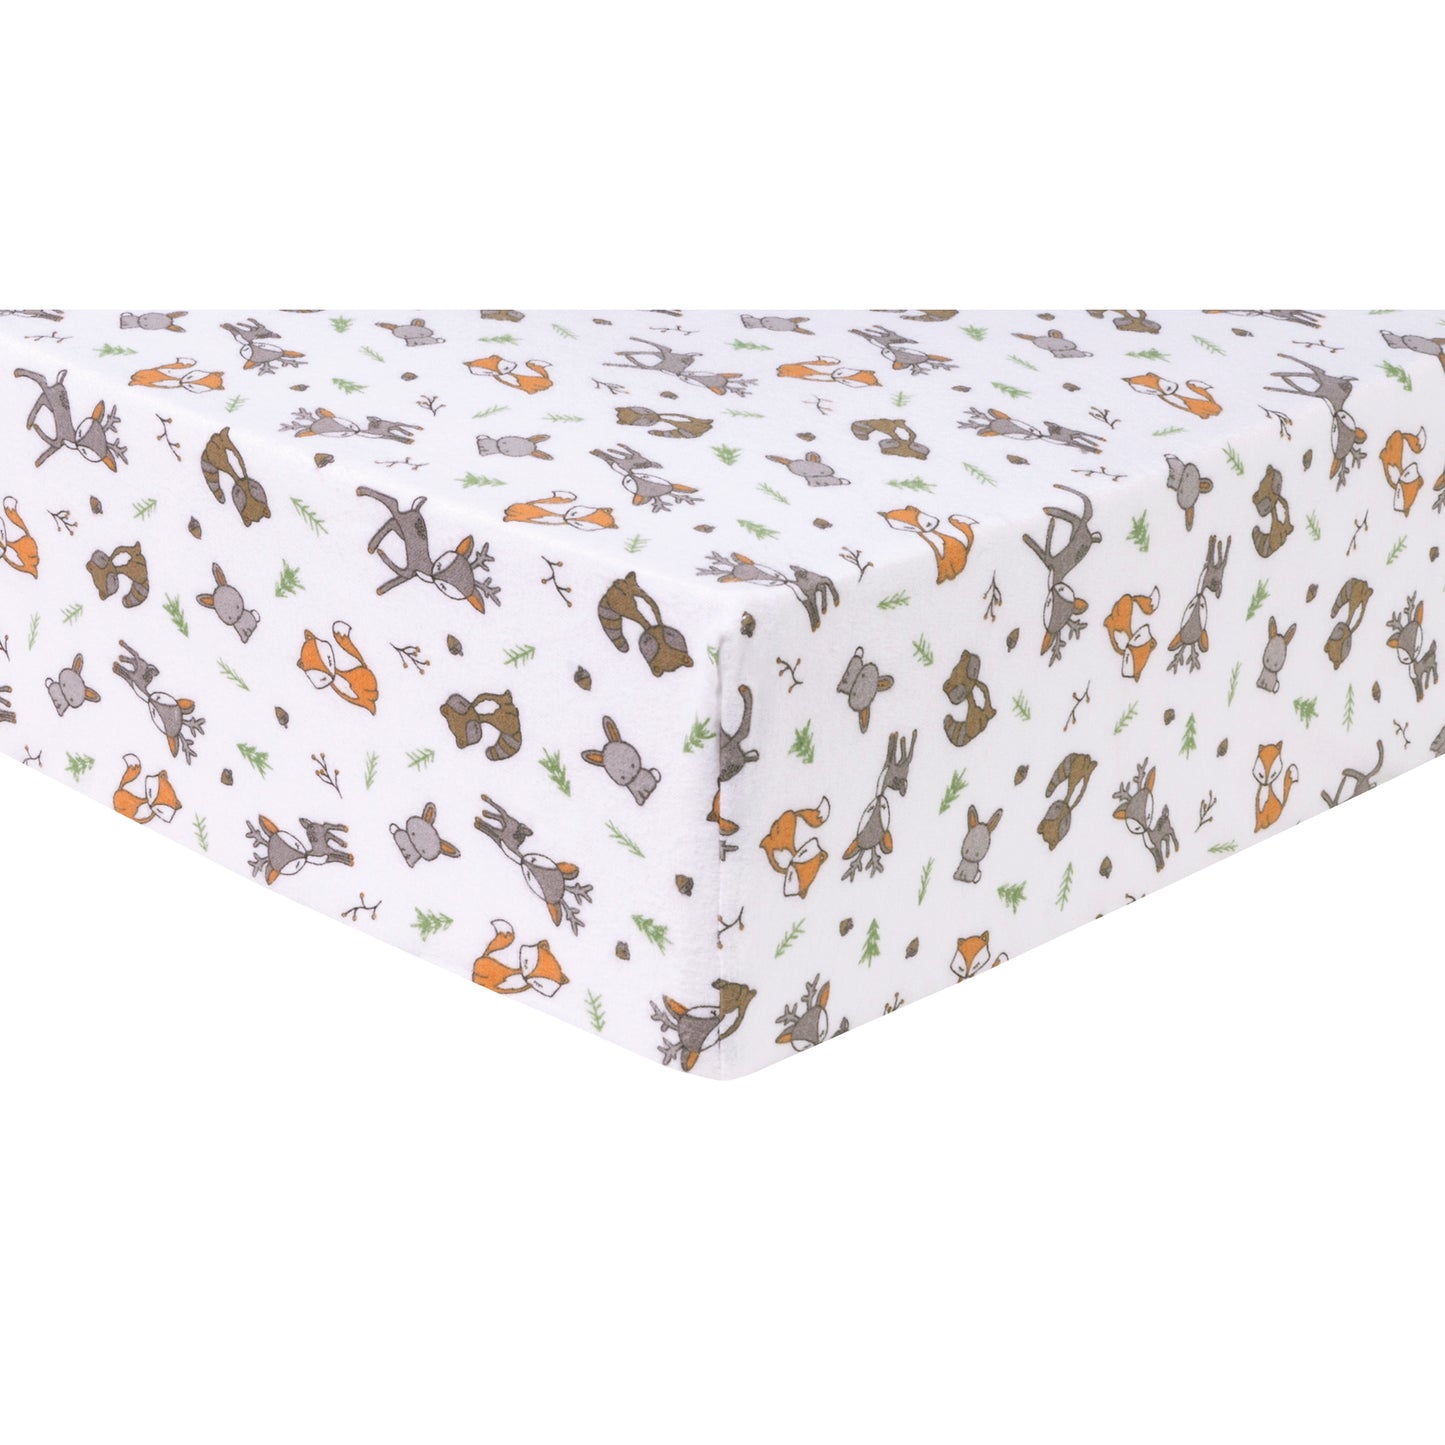 Forest Nap Deluxe Flannel Fitted Crib Sheet - Corner View; features a forest animal scatter print with deer, fox, raccoons, bunnies and trees in grays, natural brown, burnt orange and green. 